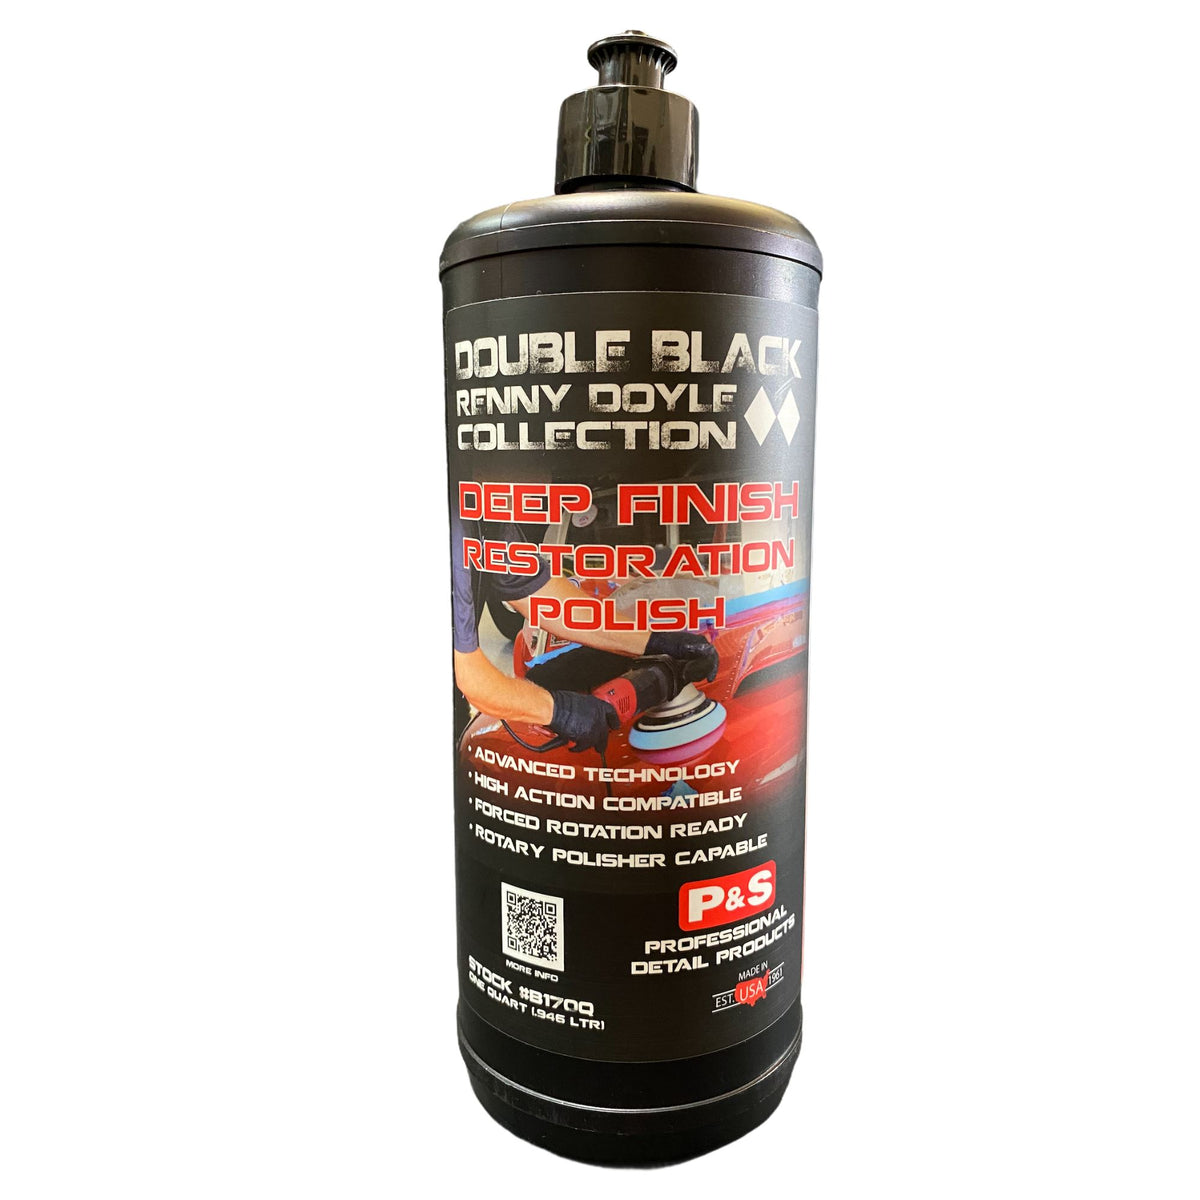 Buy P&S car detailing products? All P&S products for car detailing at CROP!